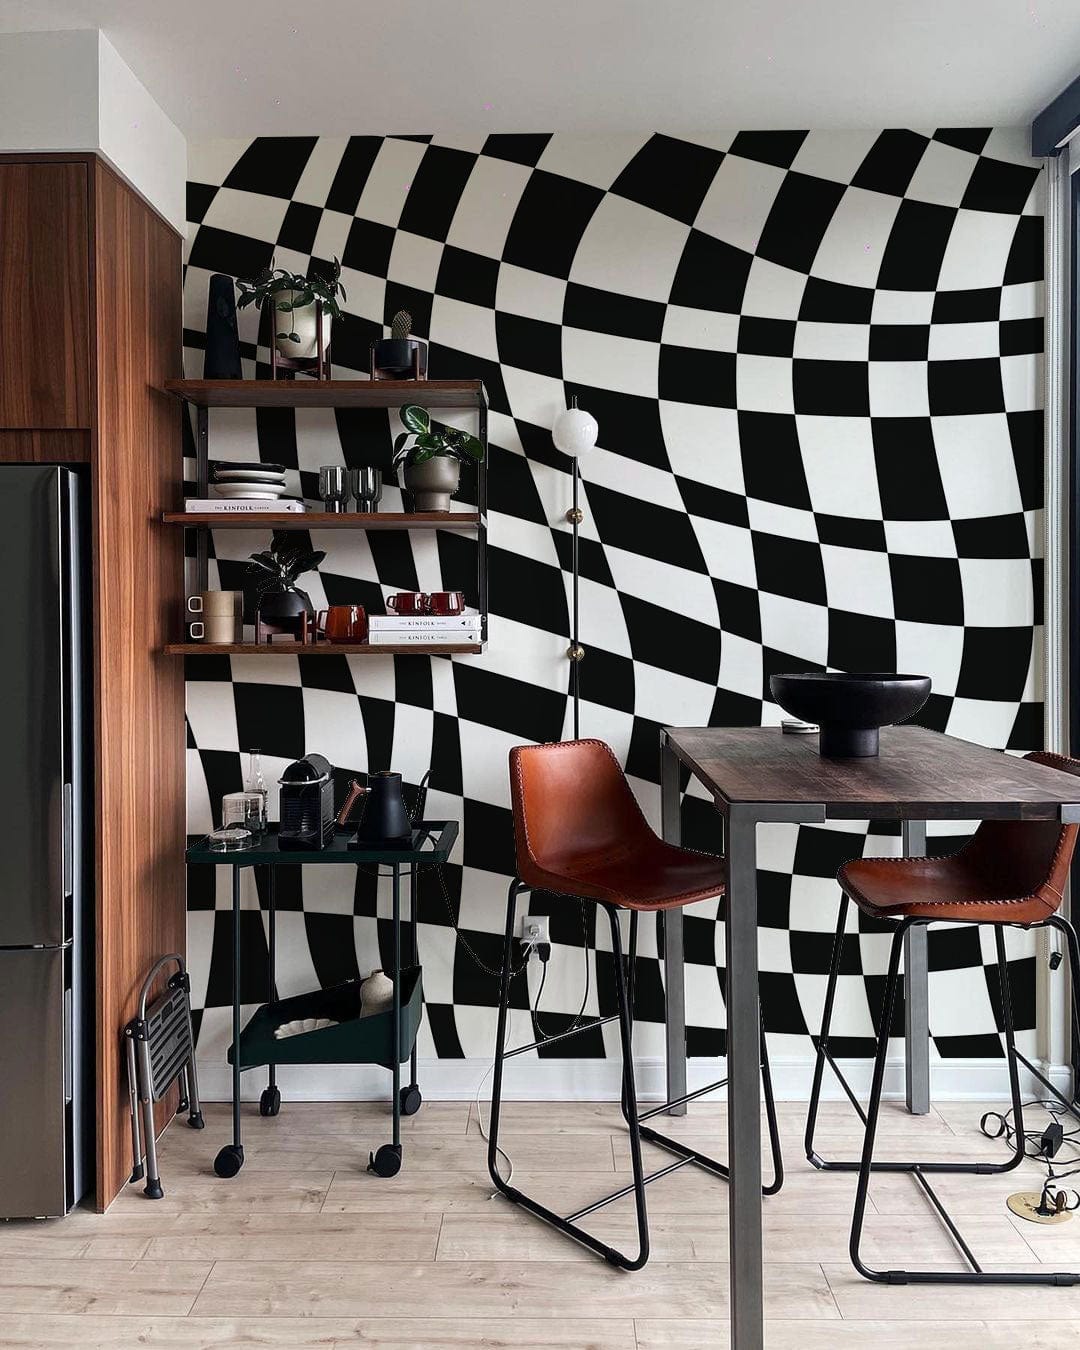 Wallpaper mural featuring a wavy checkerboard grid for use in the dining room's decor.